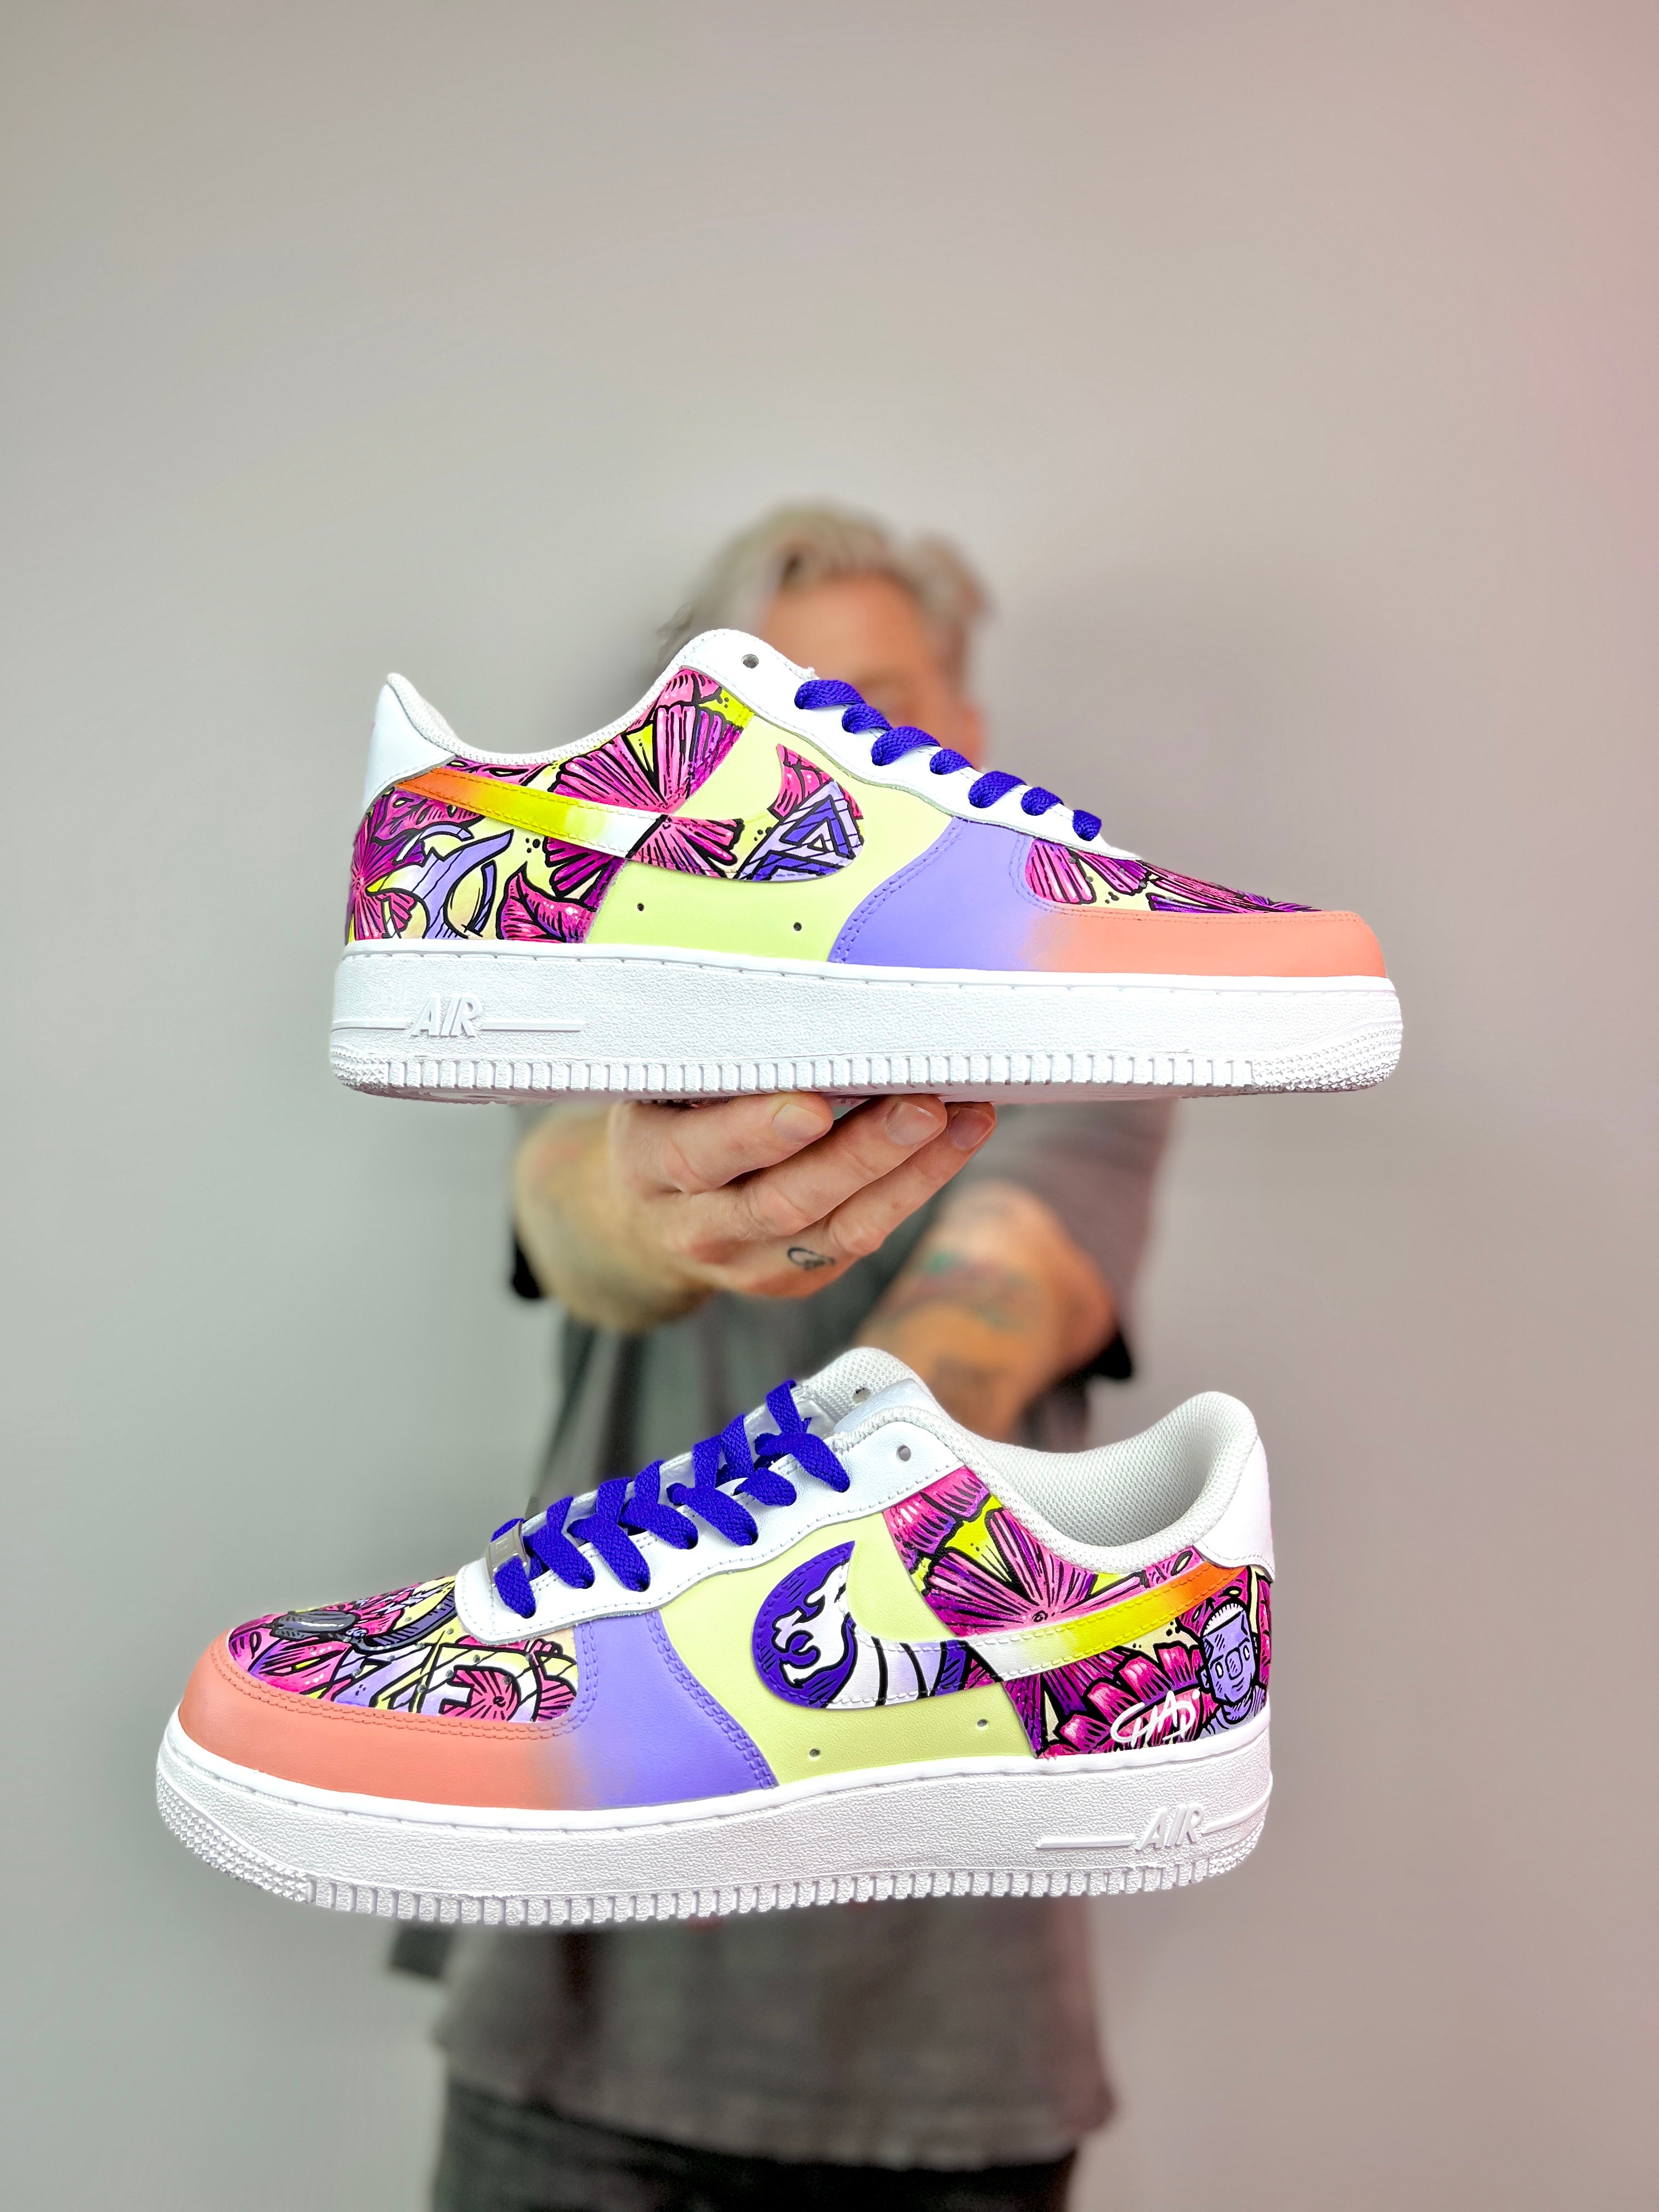 Bacardi X Chasing Summer X Chad Cantcolor - Festival collab Nike AF1 Sneakers